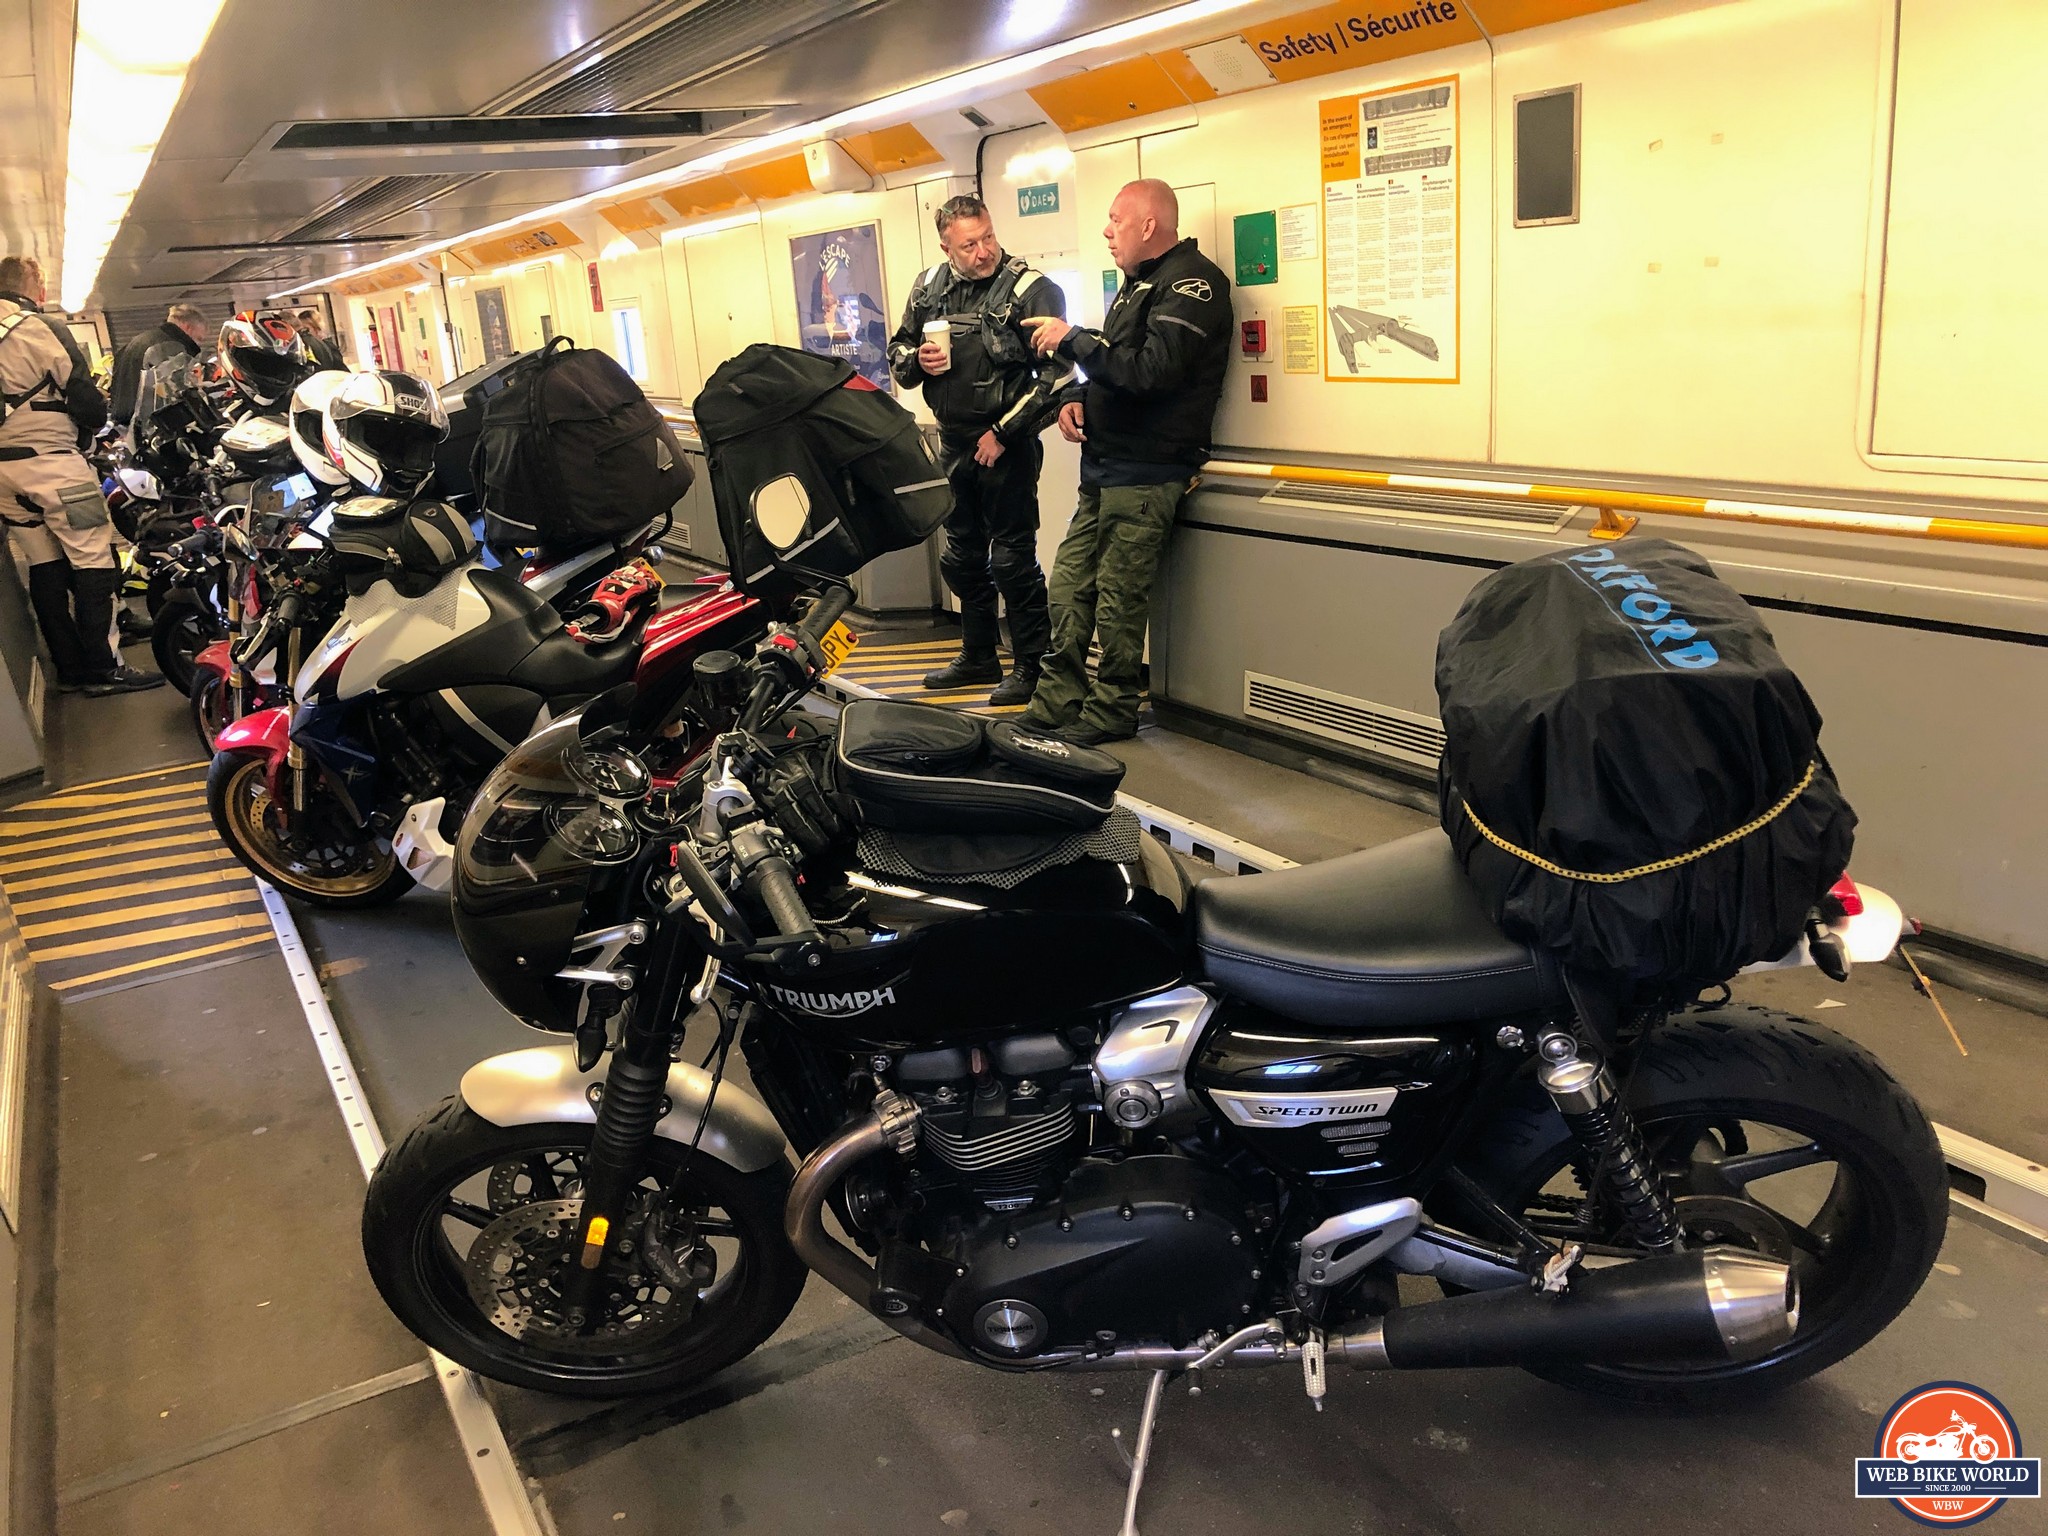 Bikers waiting for the train